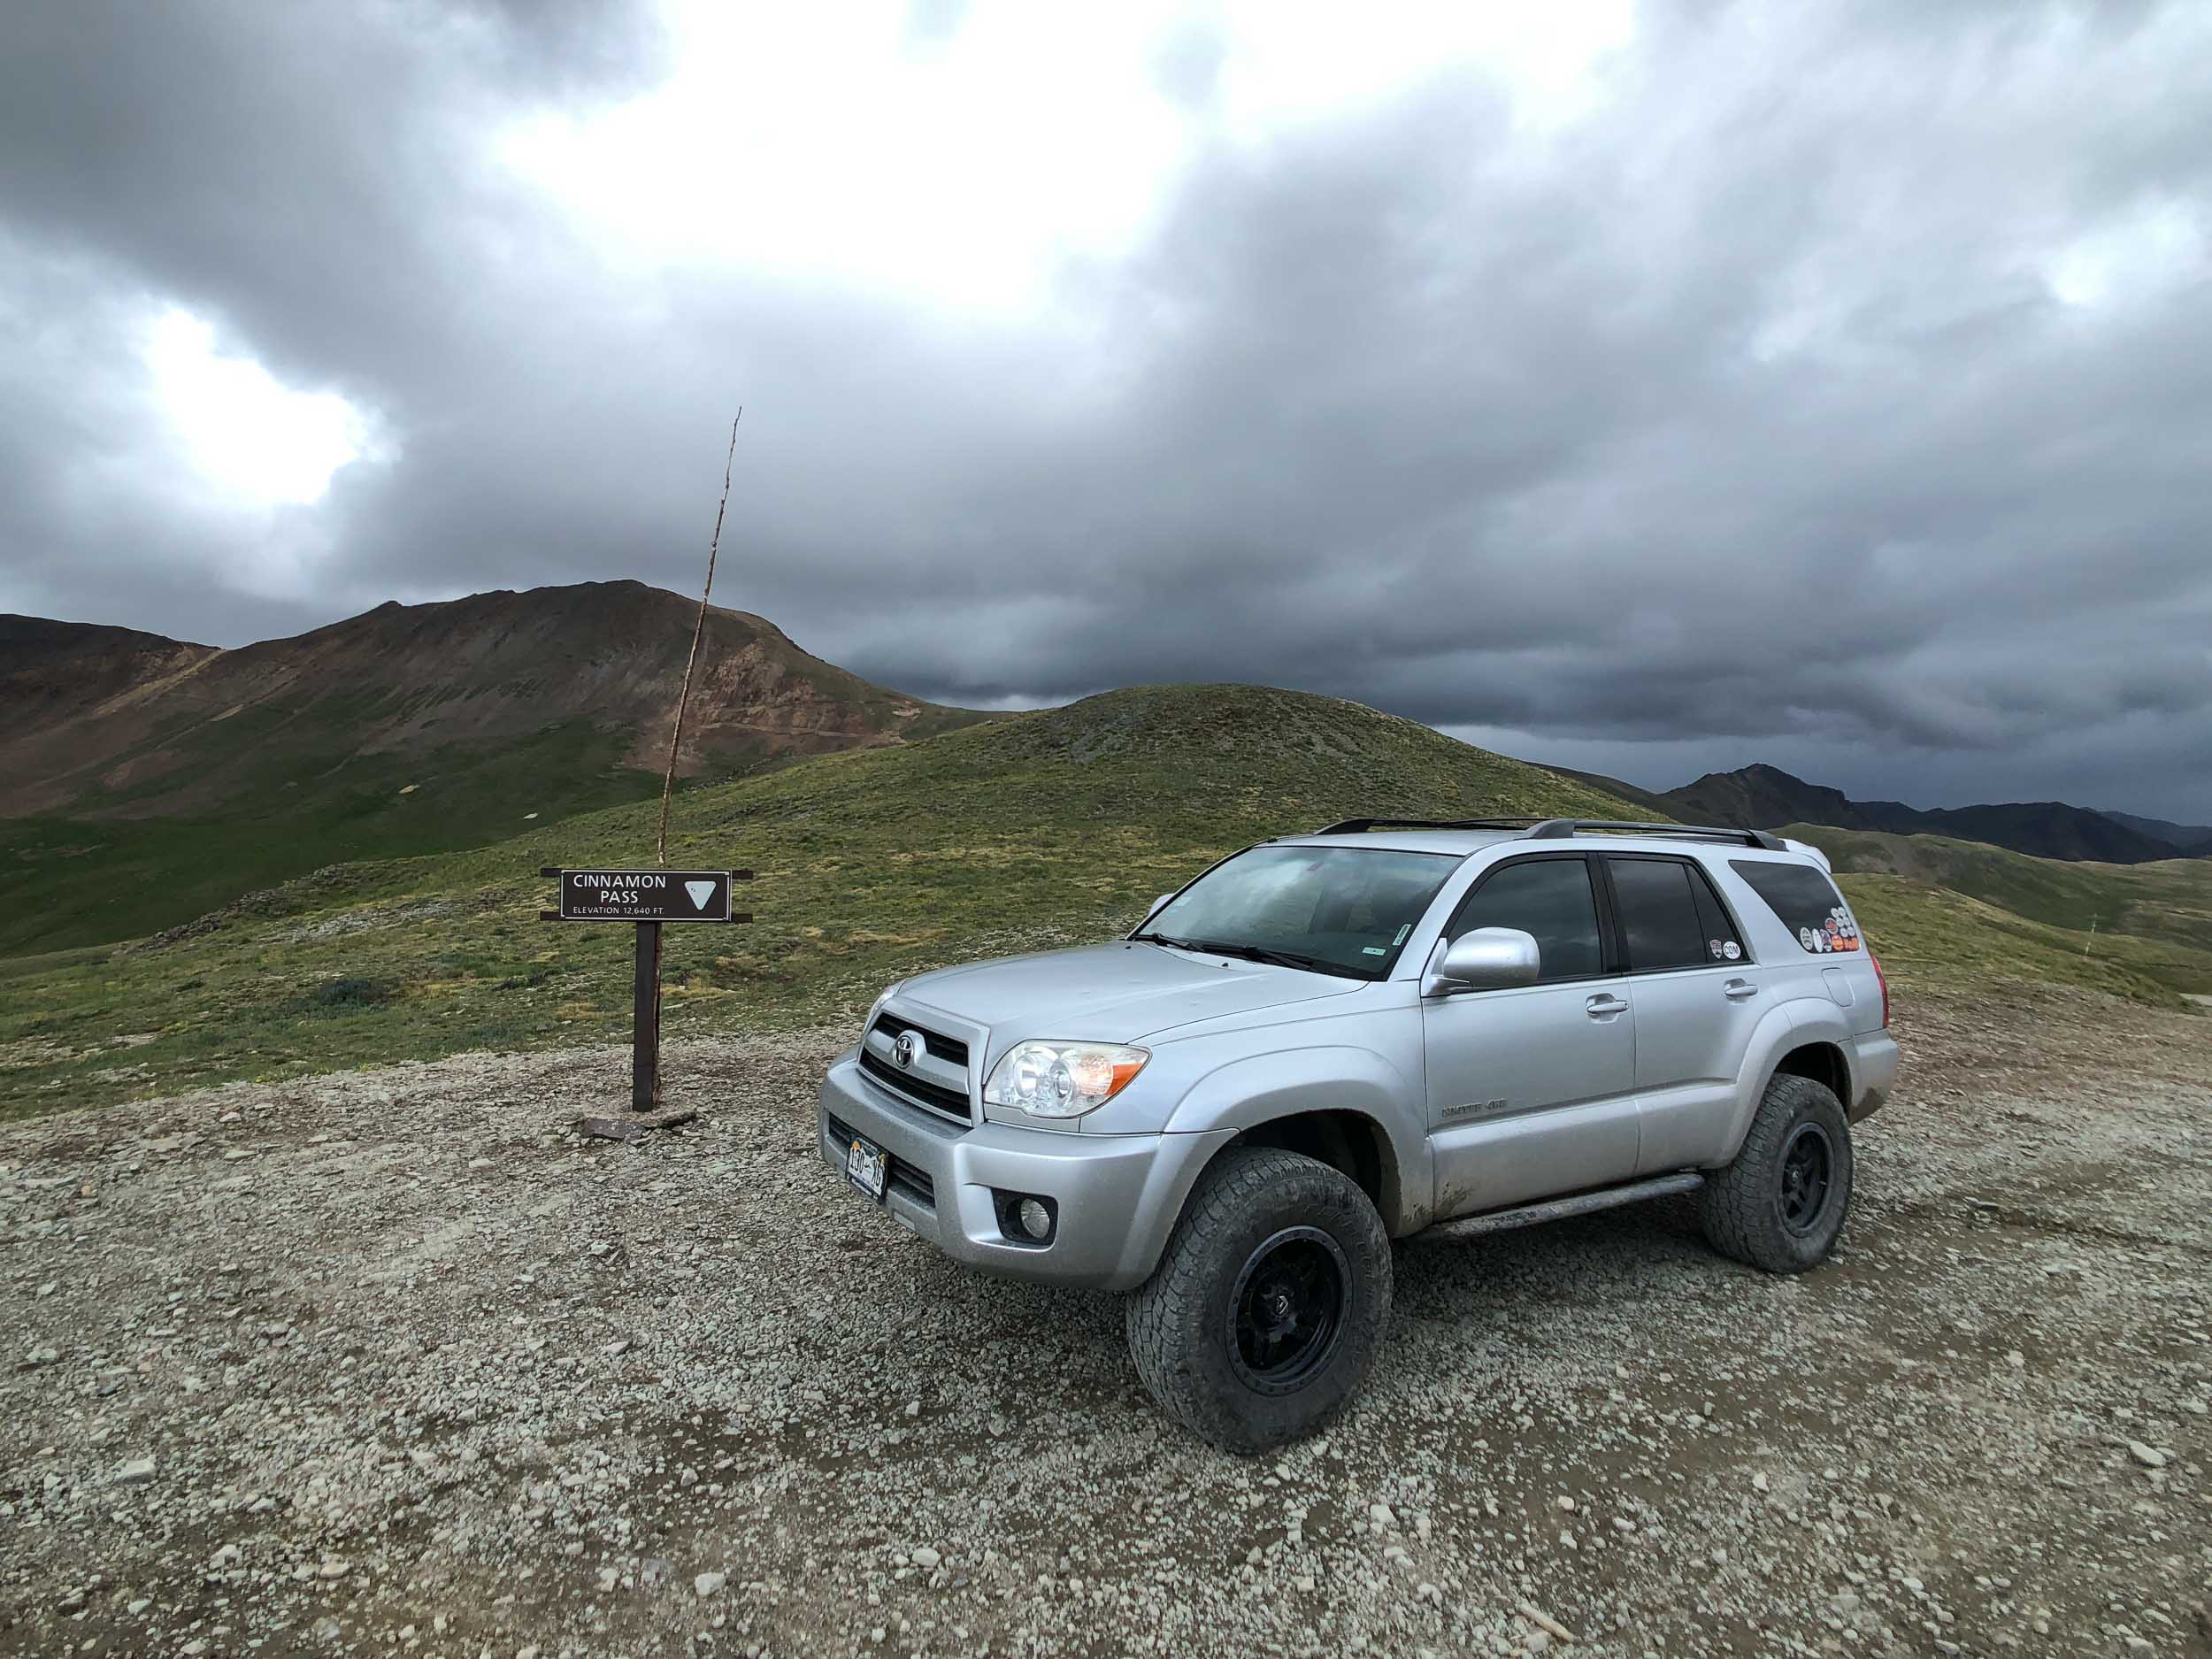  Toyota 4Runner at Cinnamon Pass - iPhone 8 Plus, Moment Wide Lens 